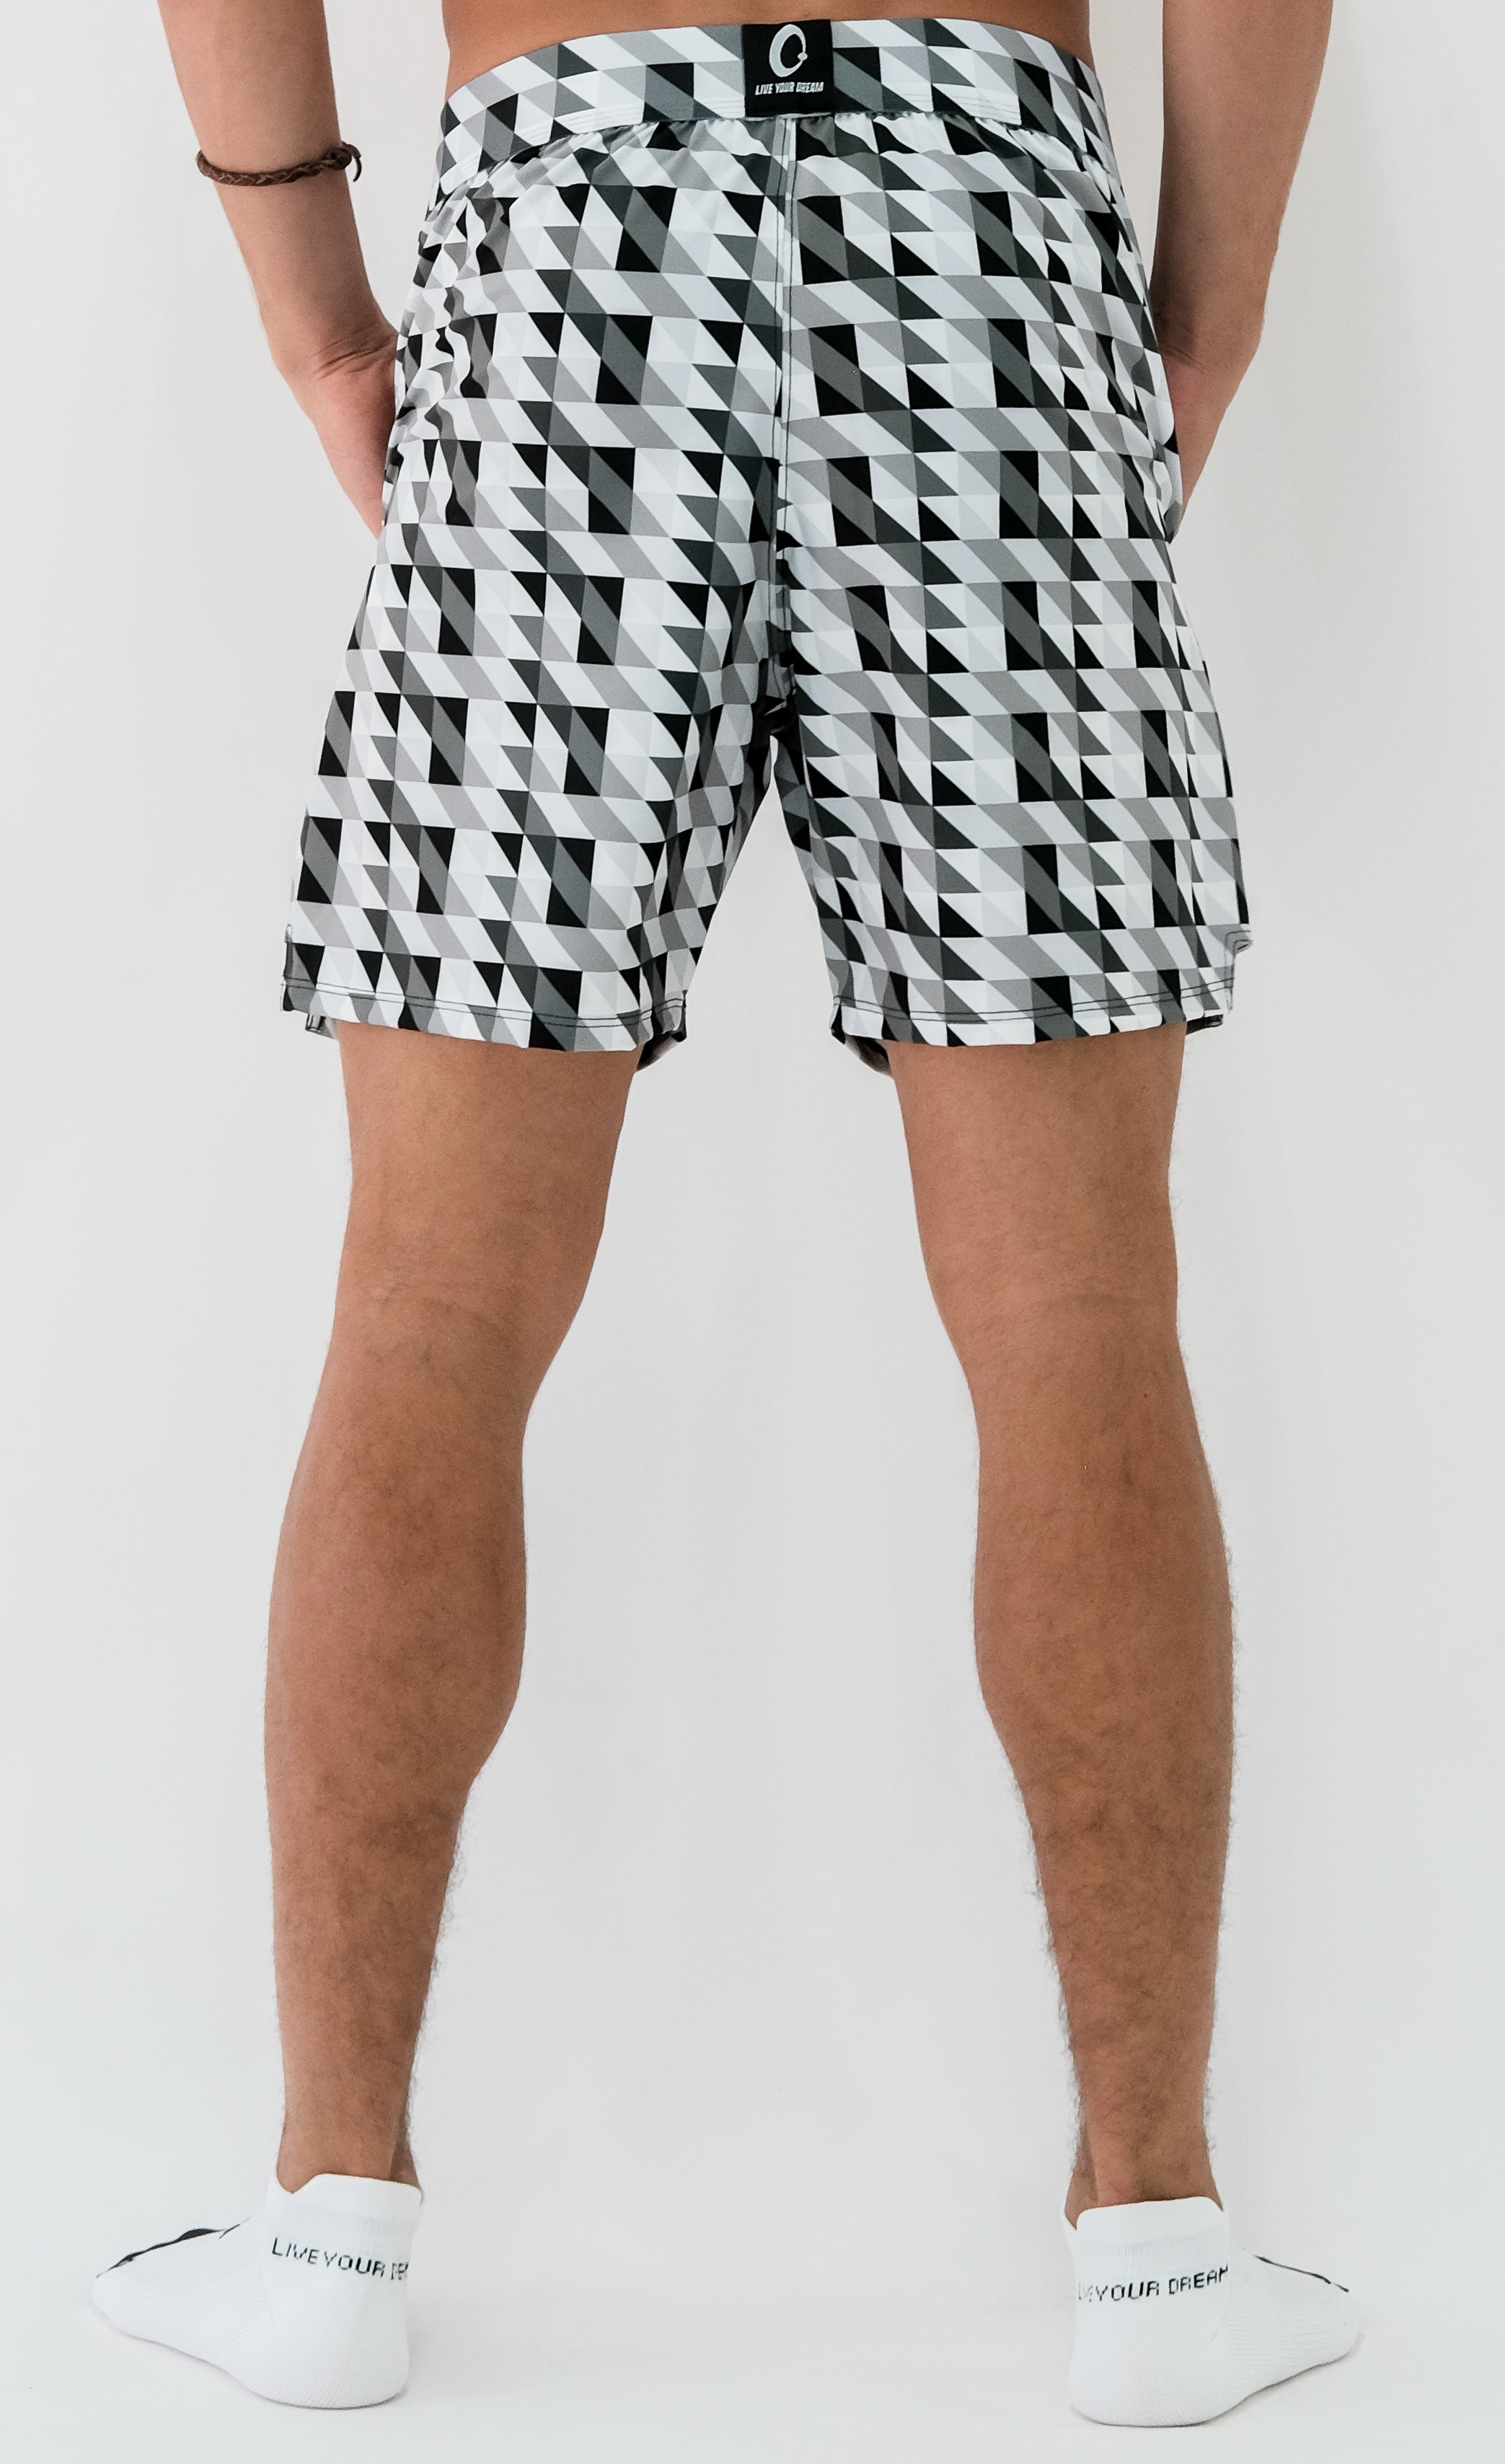 Men's fitness short recycled triangles